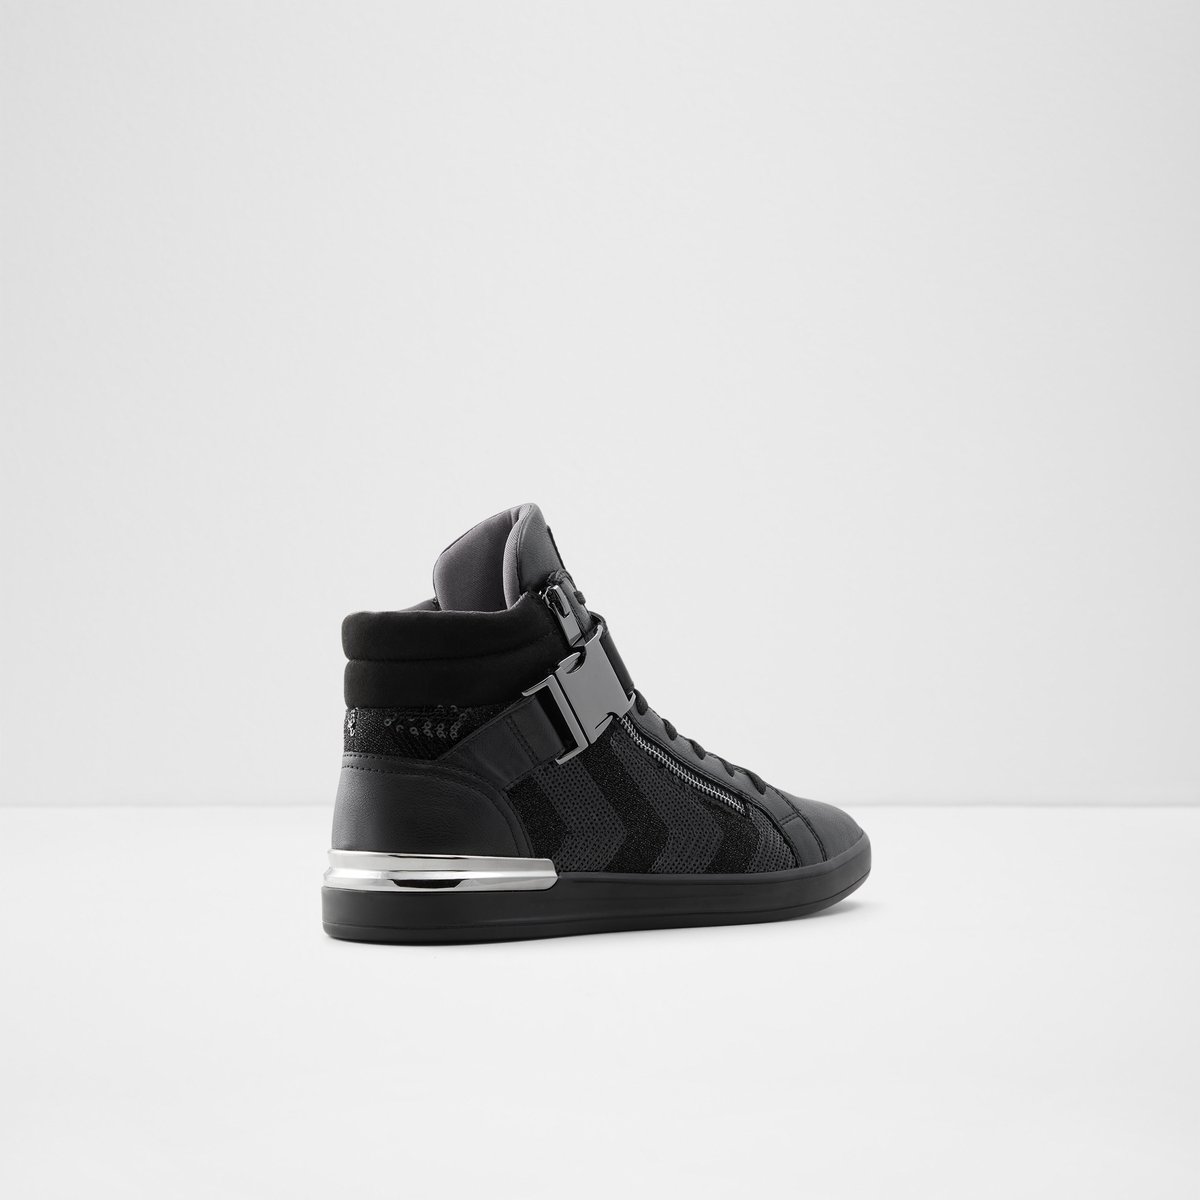 Buy Sneaker Collection Online | Aldo Shoes